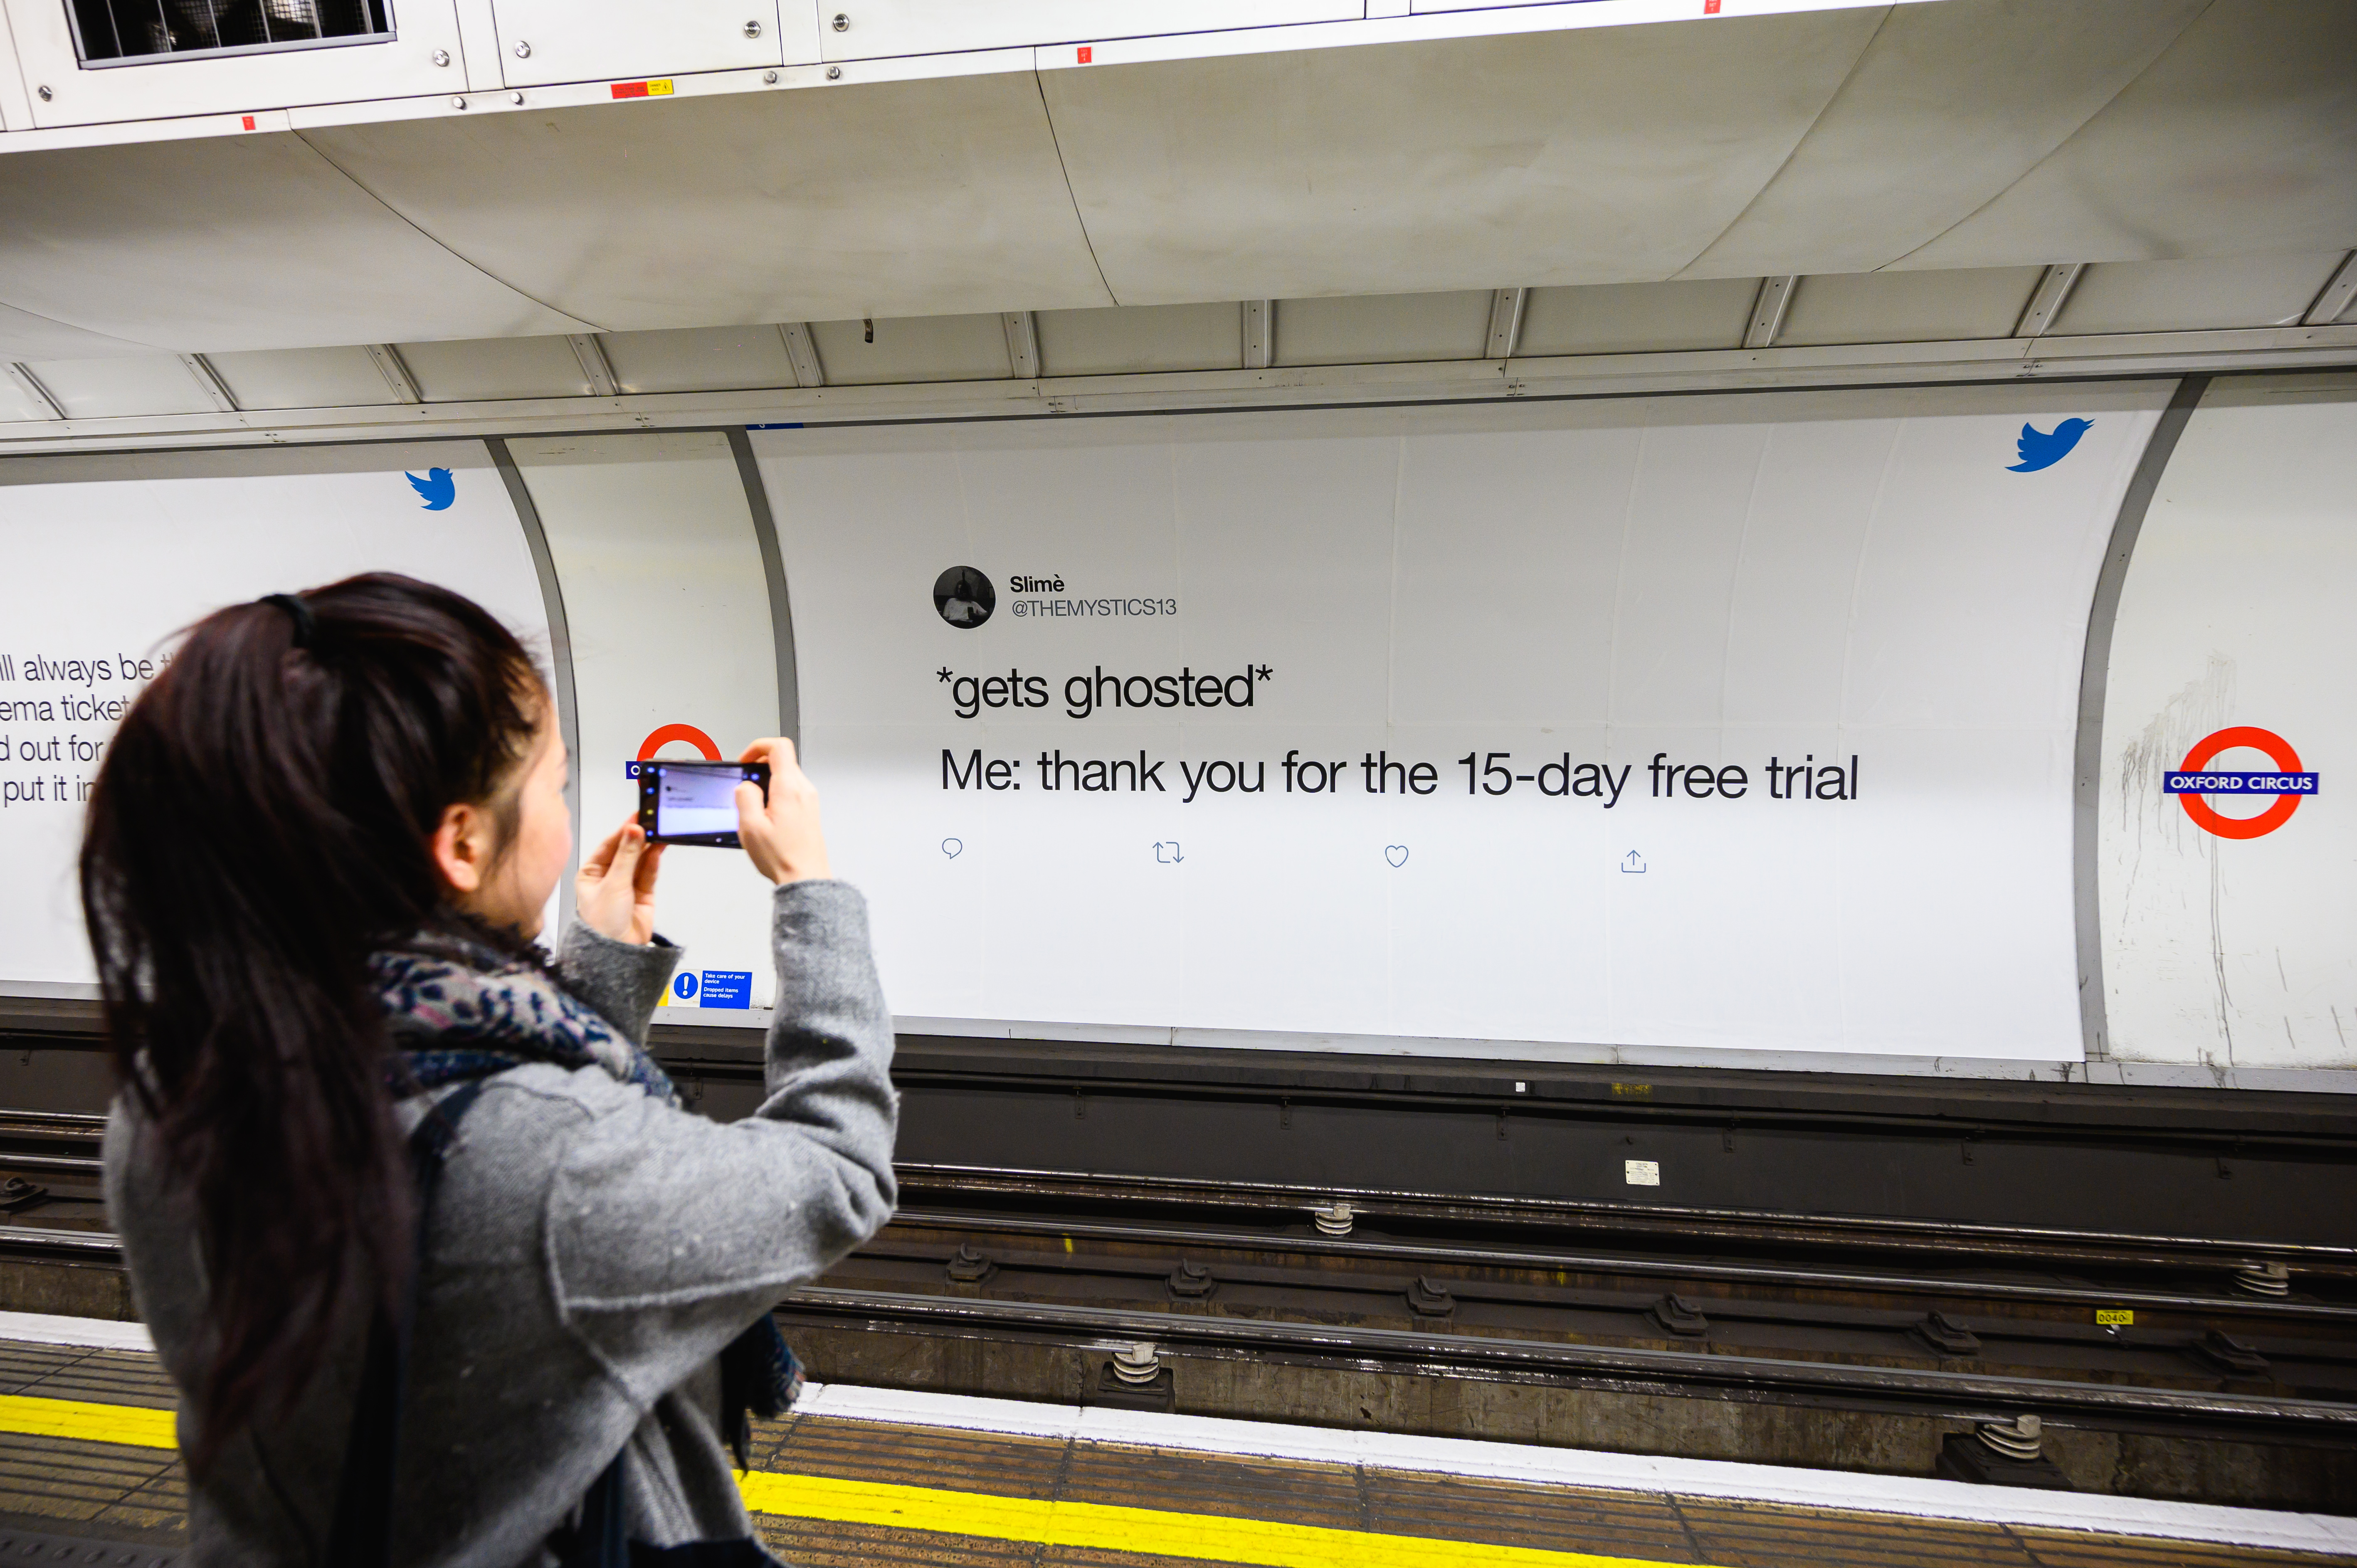 One of our Tweet billboards for Twitter dating